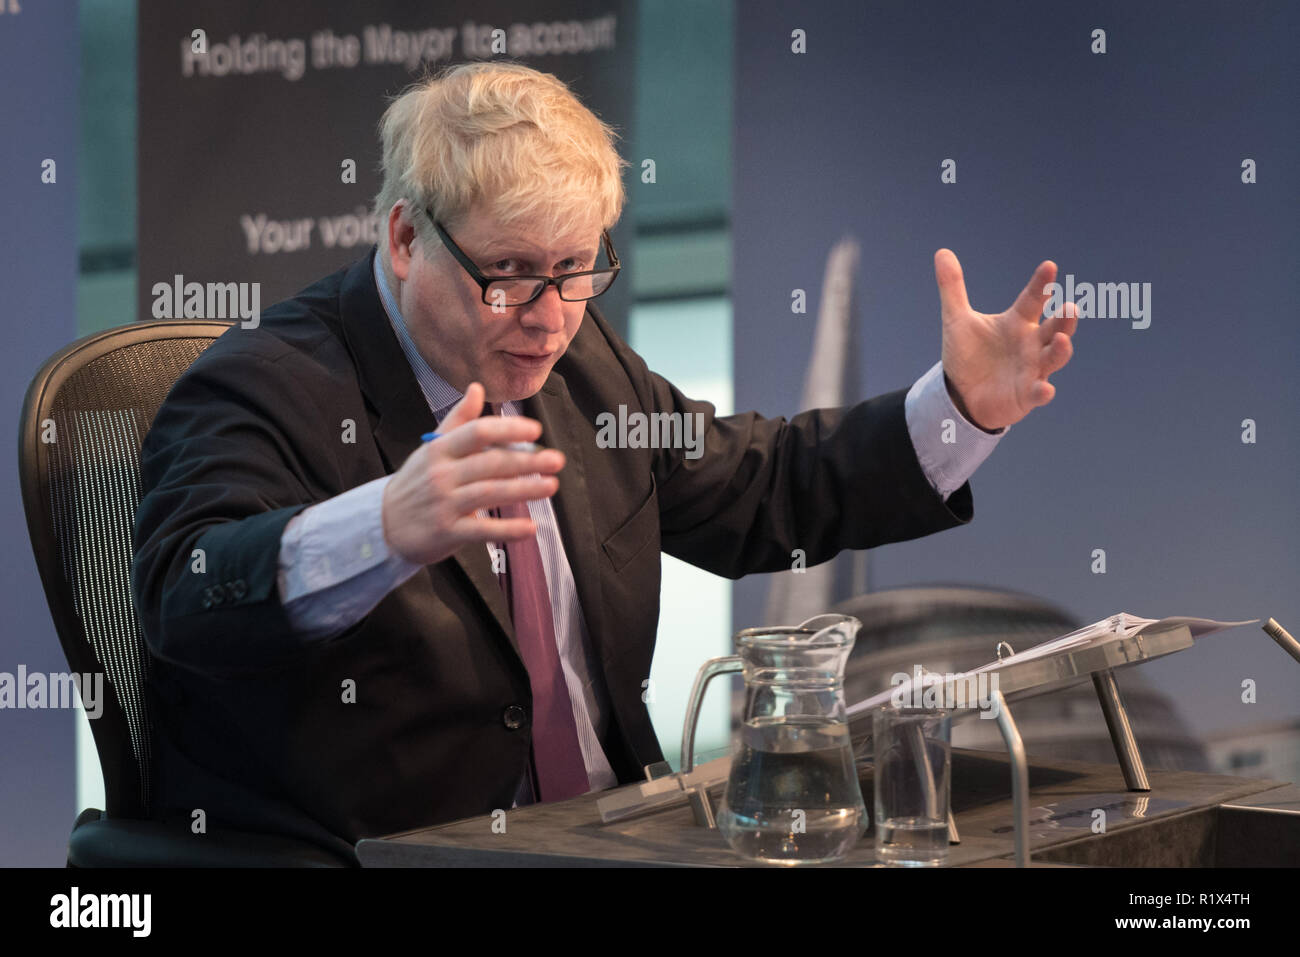 The Chamber at City Hall, The Queen’s Walk, London, UK. 22nd February, 2016. The current Mayor of London, Boris Johnson, presents his last £16 billion Stock Photo